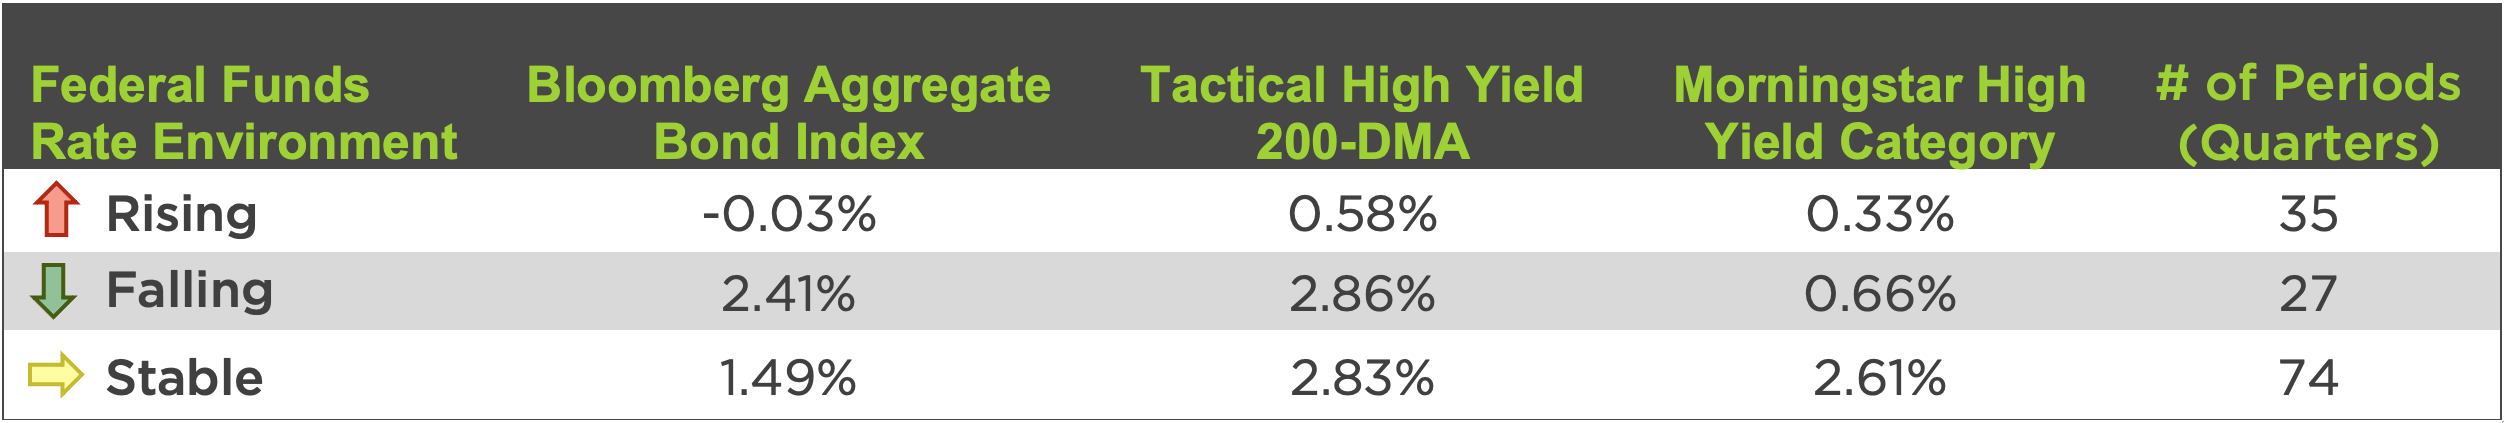 200-DMA Strategy Performance During 3-Year Periods of Rising & Falling Rates